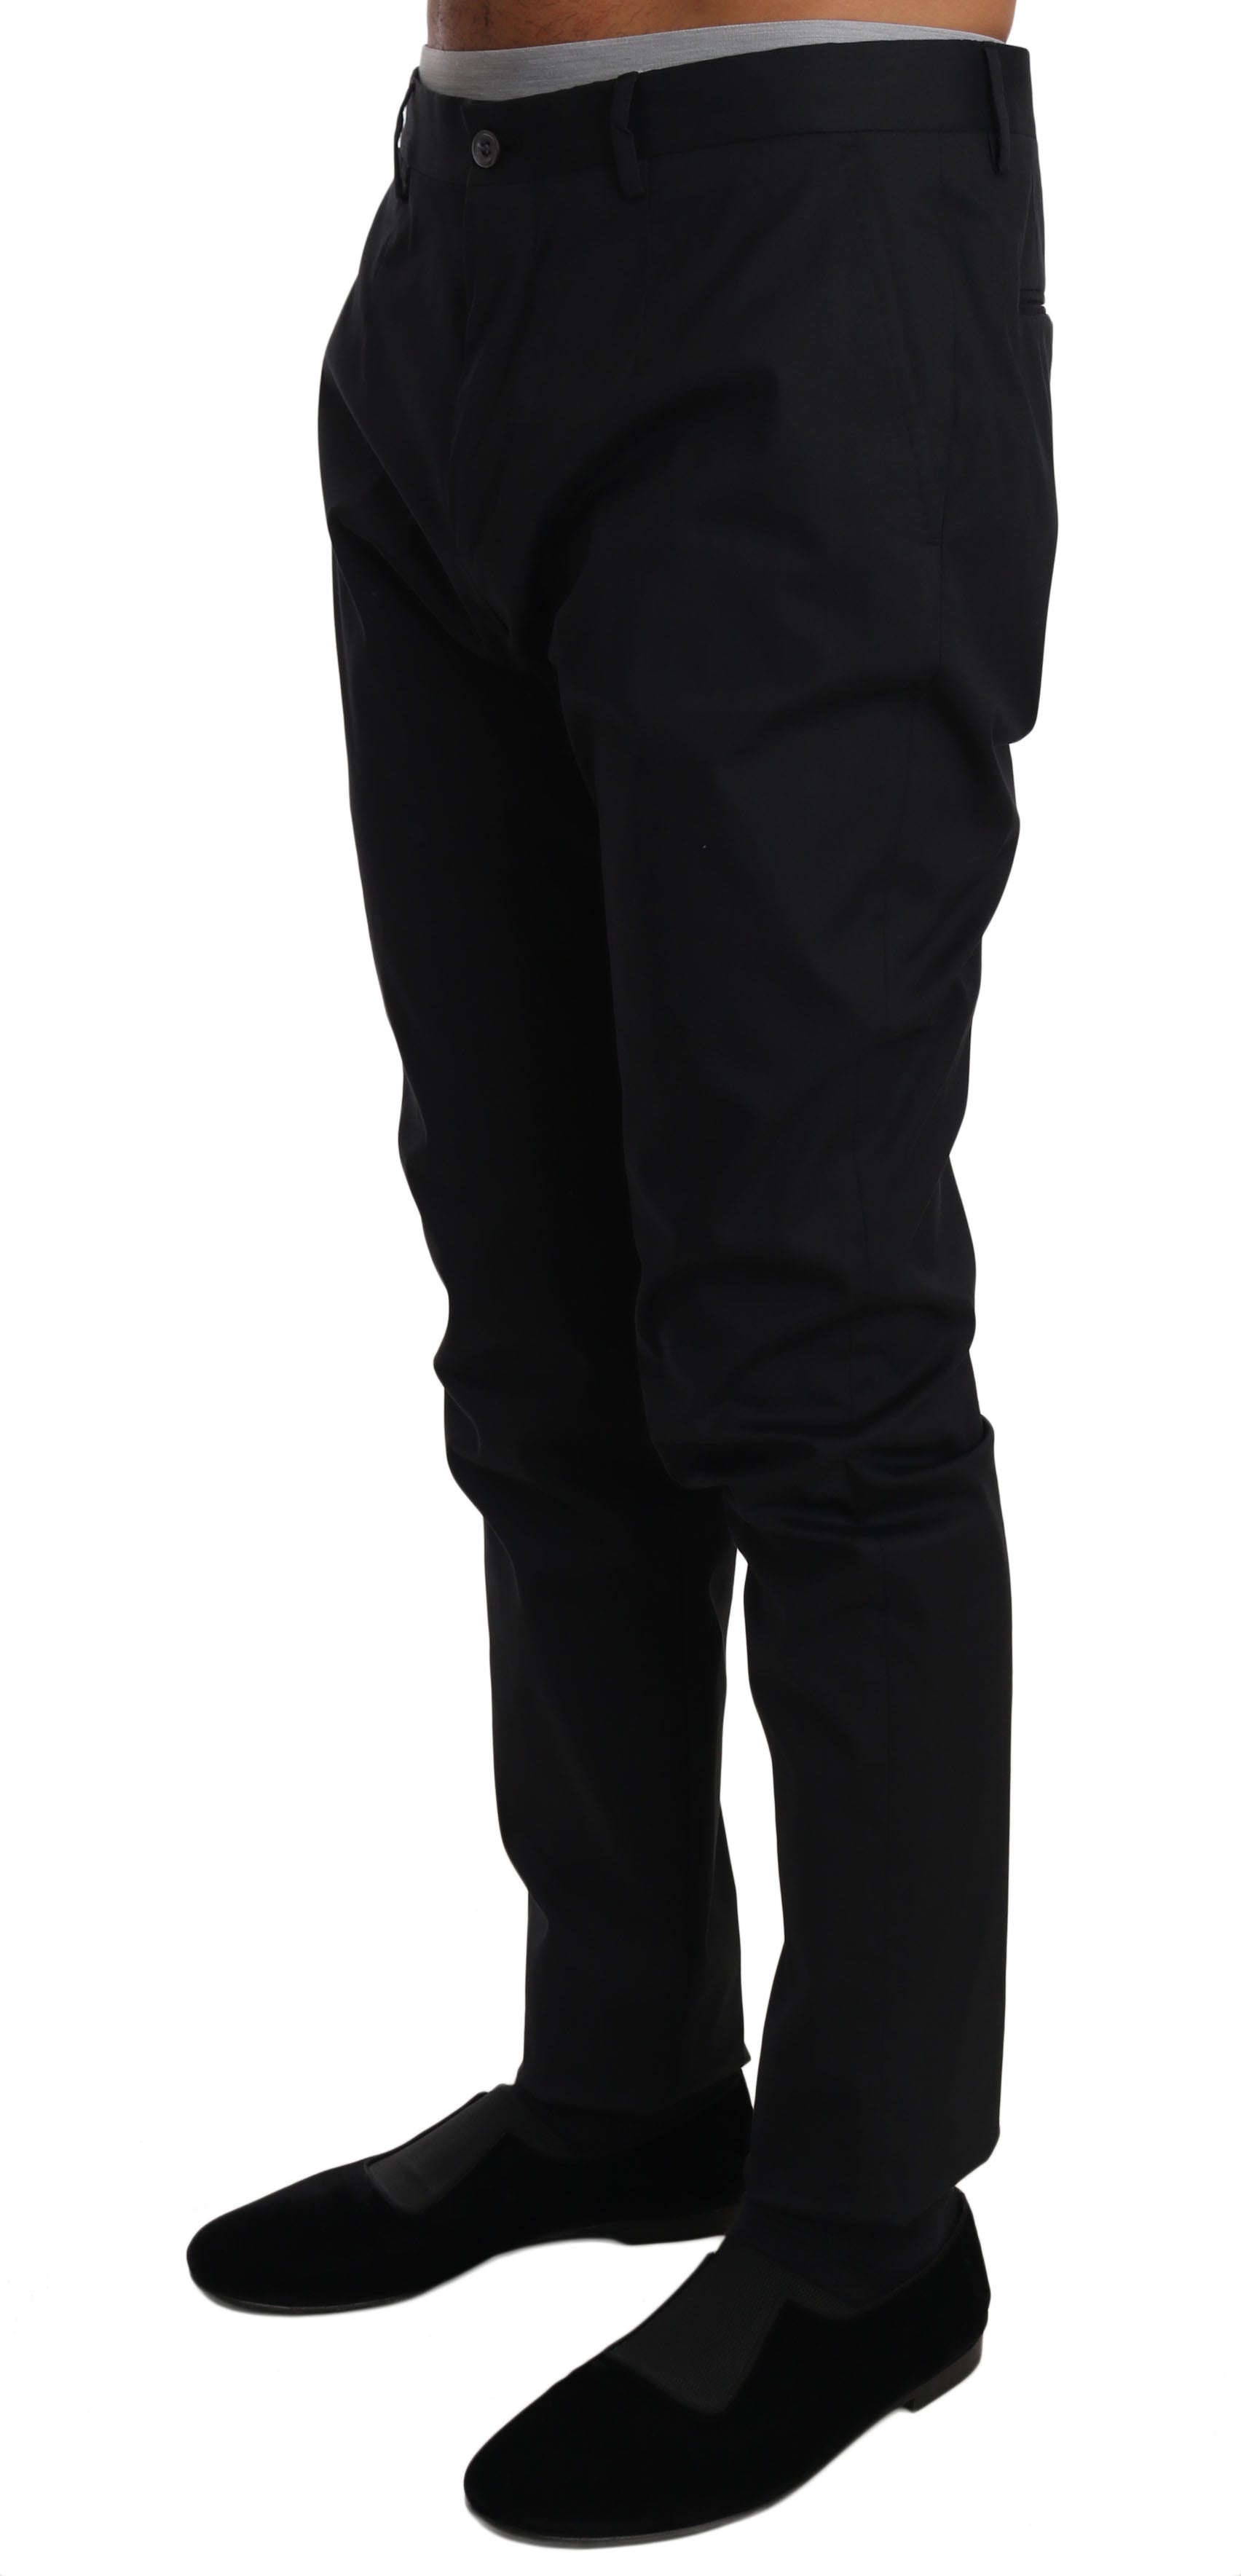 Buy Black Cotton Stretch Formal Trousers Pants by Dolce & Gabbana